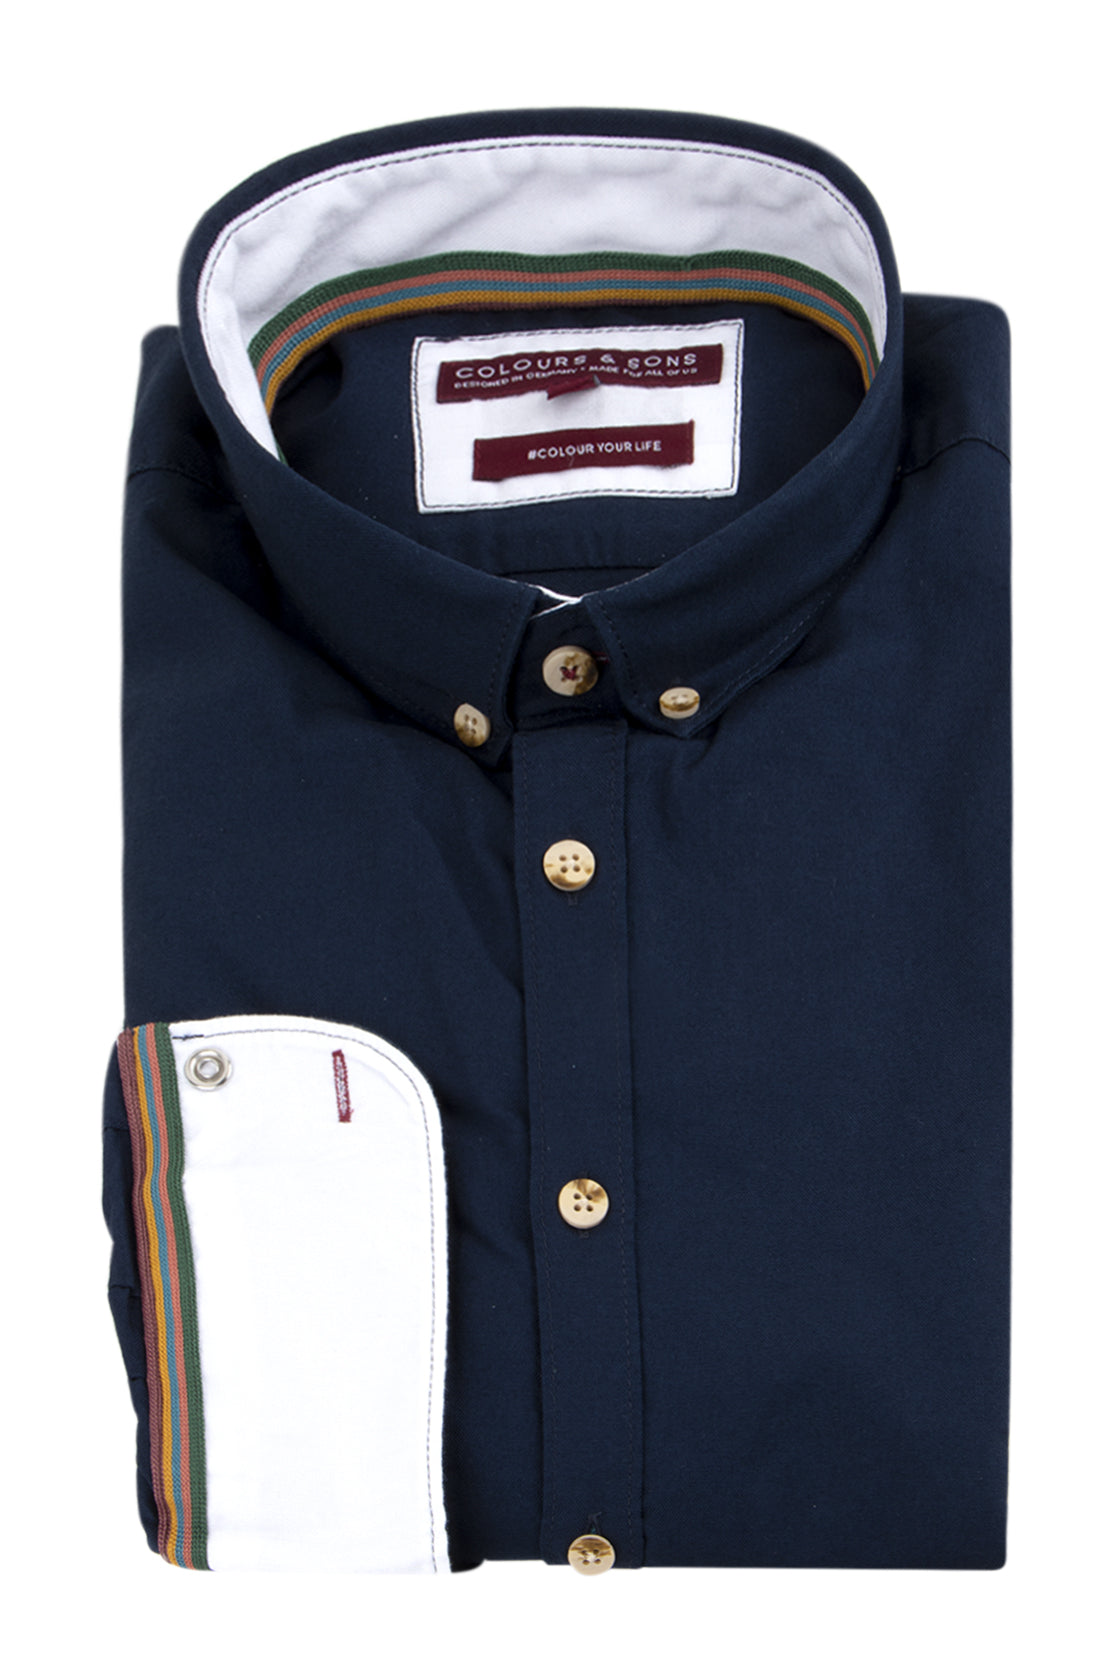 Colours & Sons Casual Shirt Navy